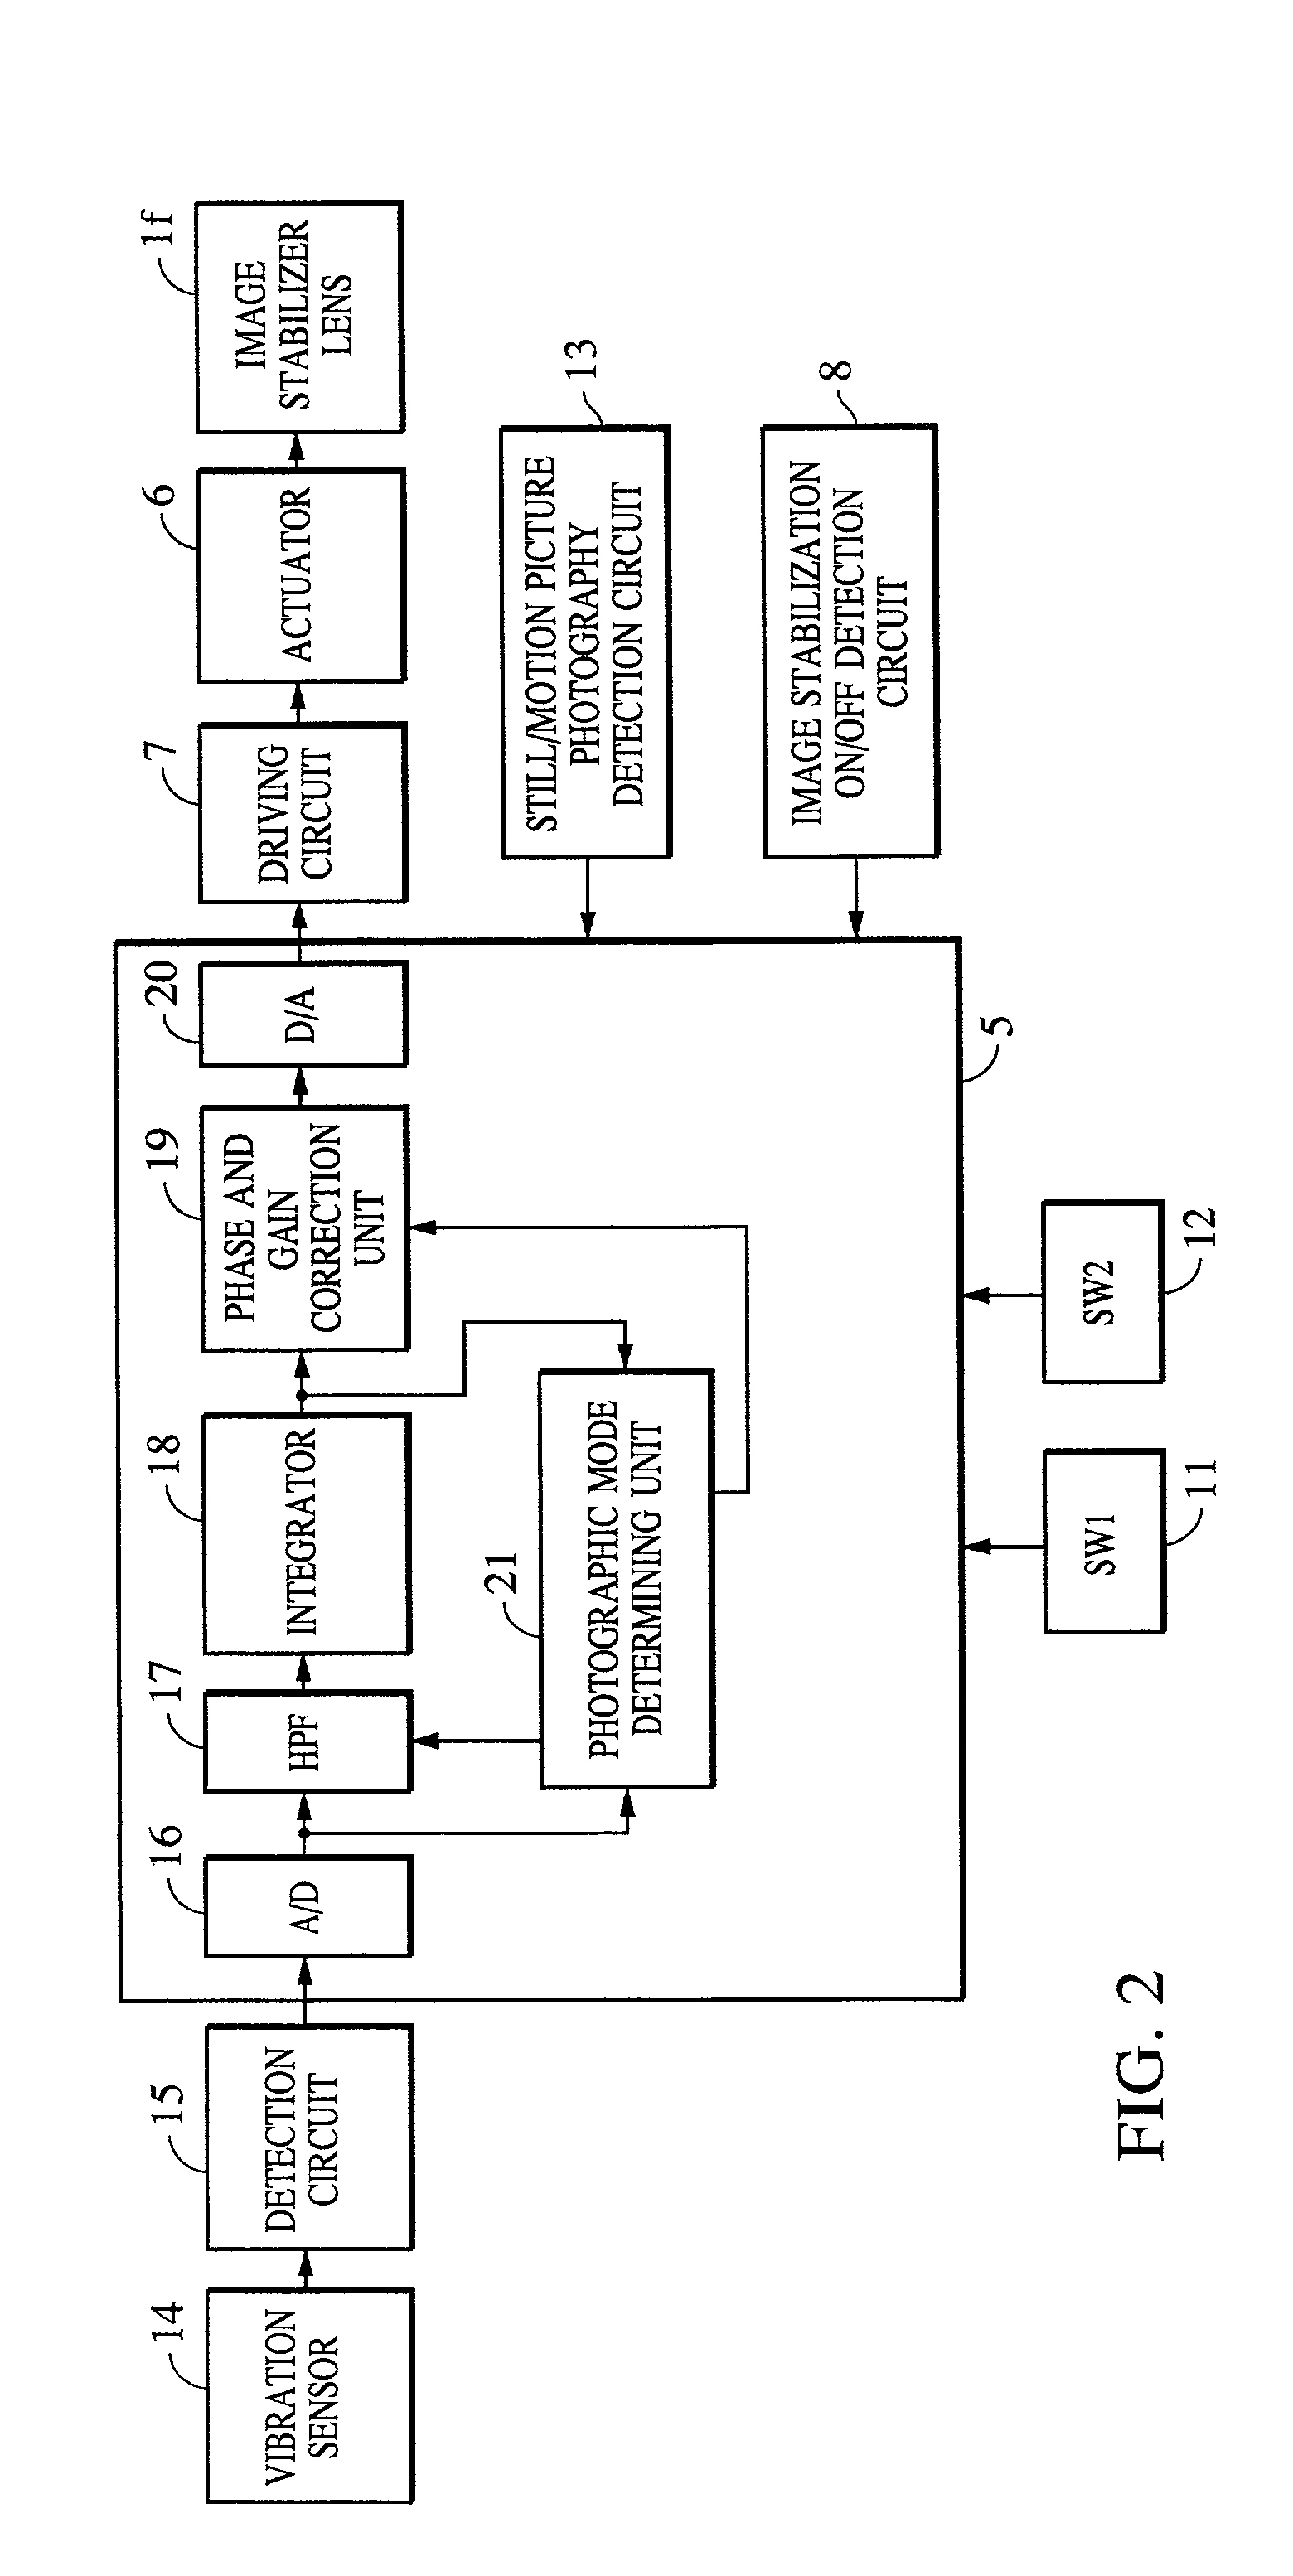 Photographing apparatus having variable image blur correction control characteristics for still photography and motion picture photography